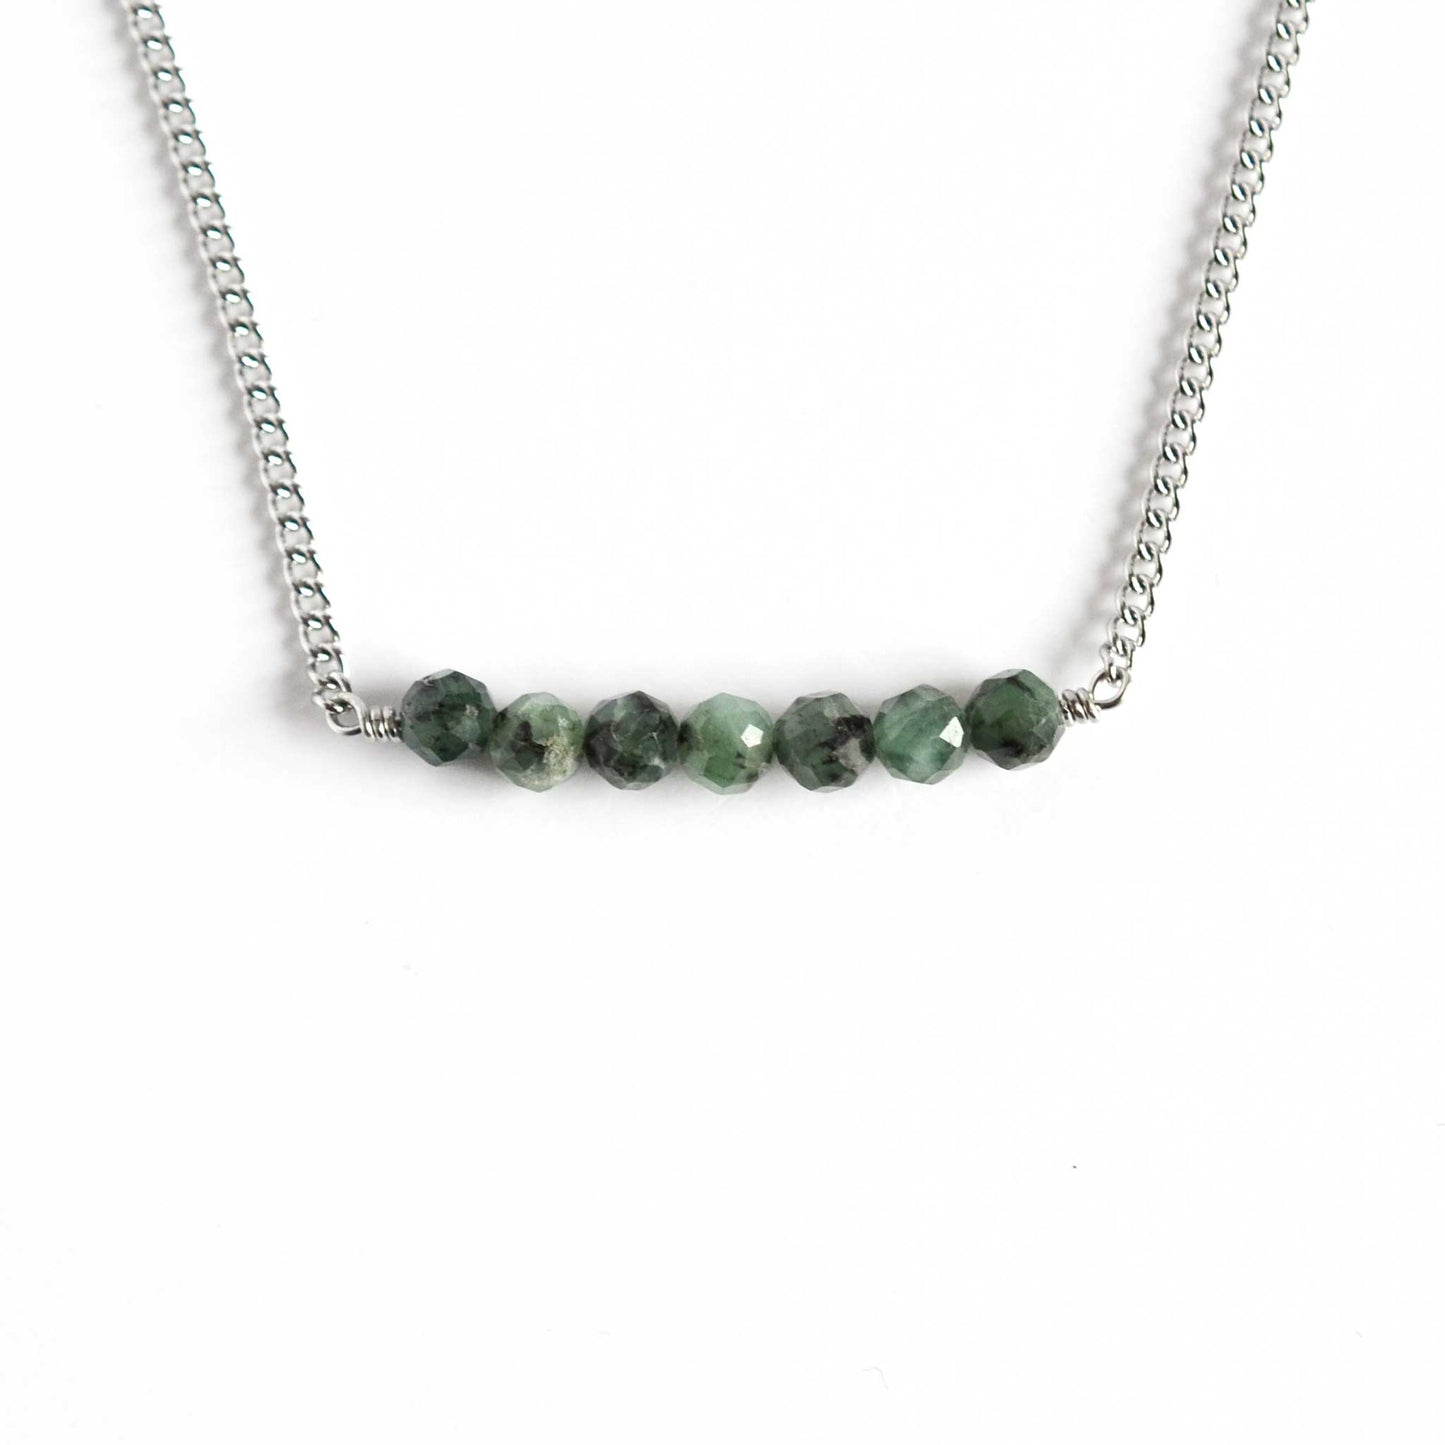 Dainty necklace with Emerald stones on white background